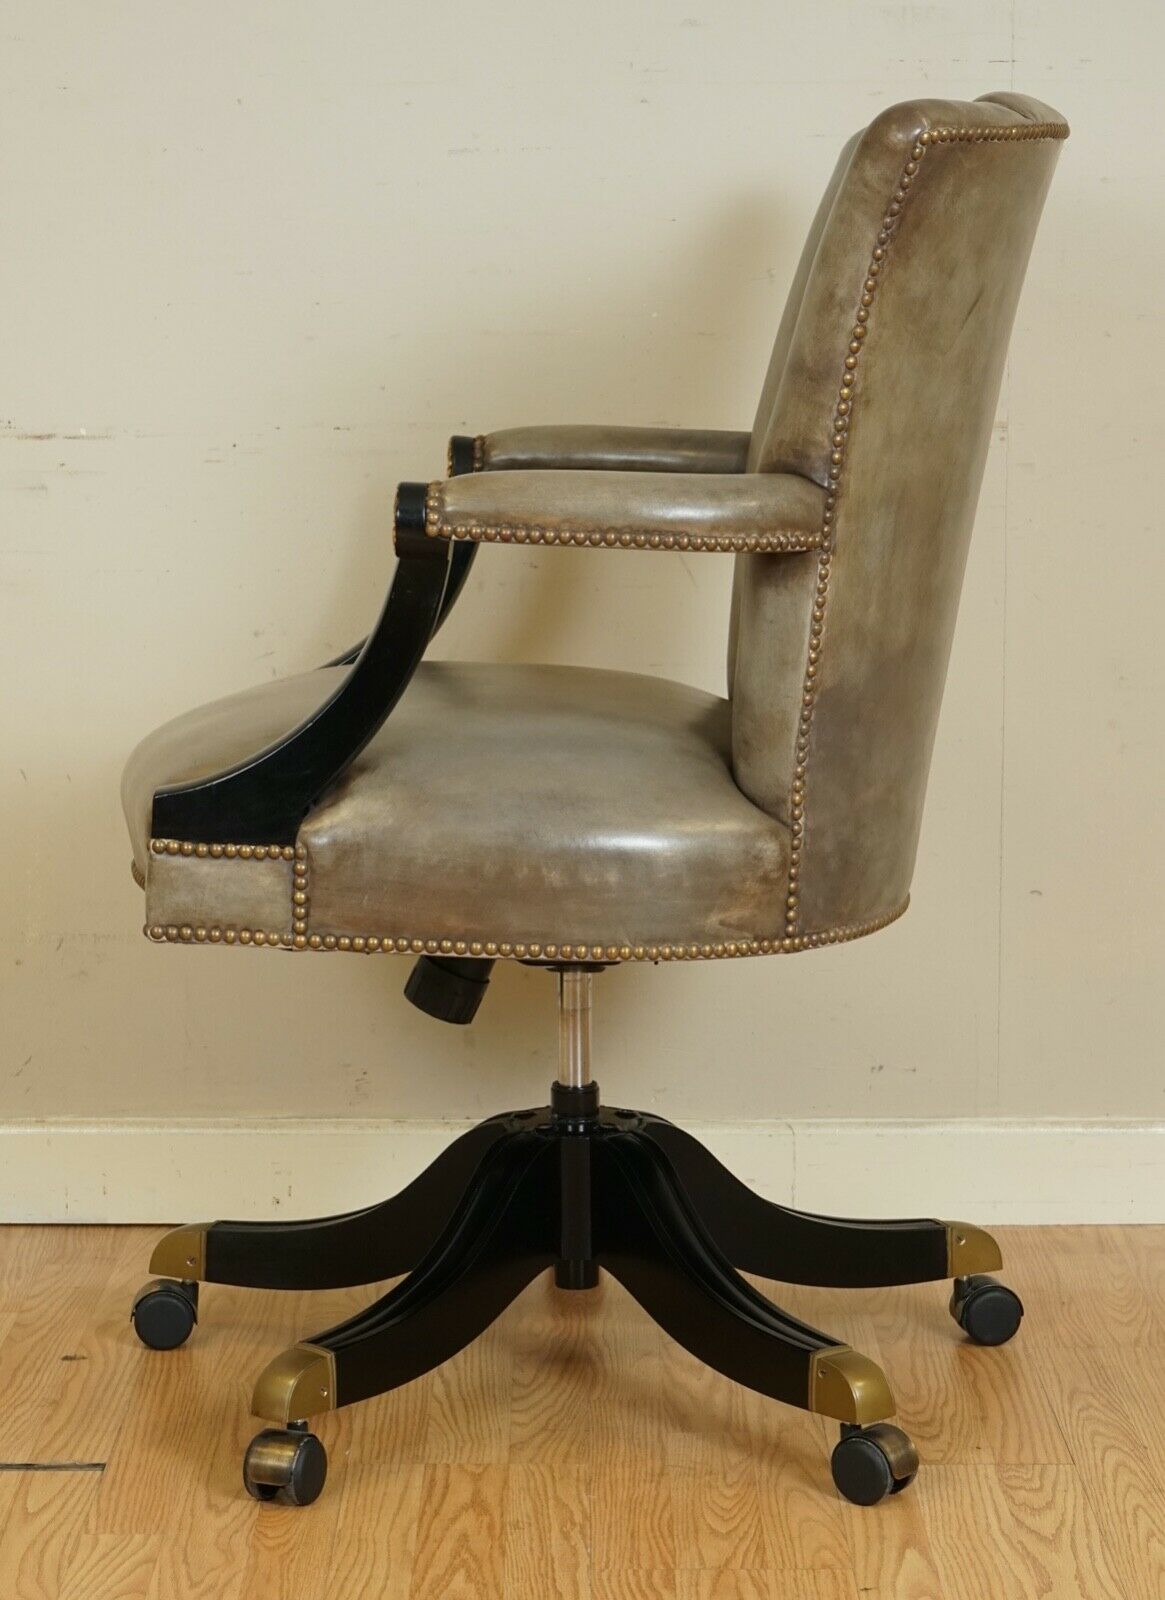 VINTAGE ART DECO SHELL BACK GREY LEATHER LACQUERED FRAME SWIVEL CHAIR 1 OF 2